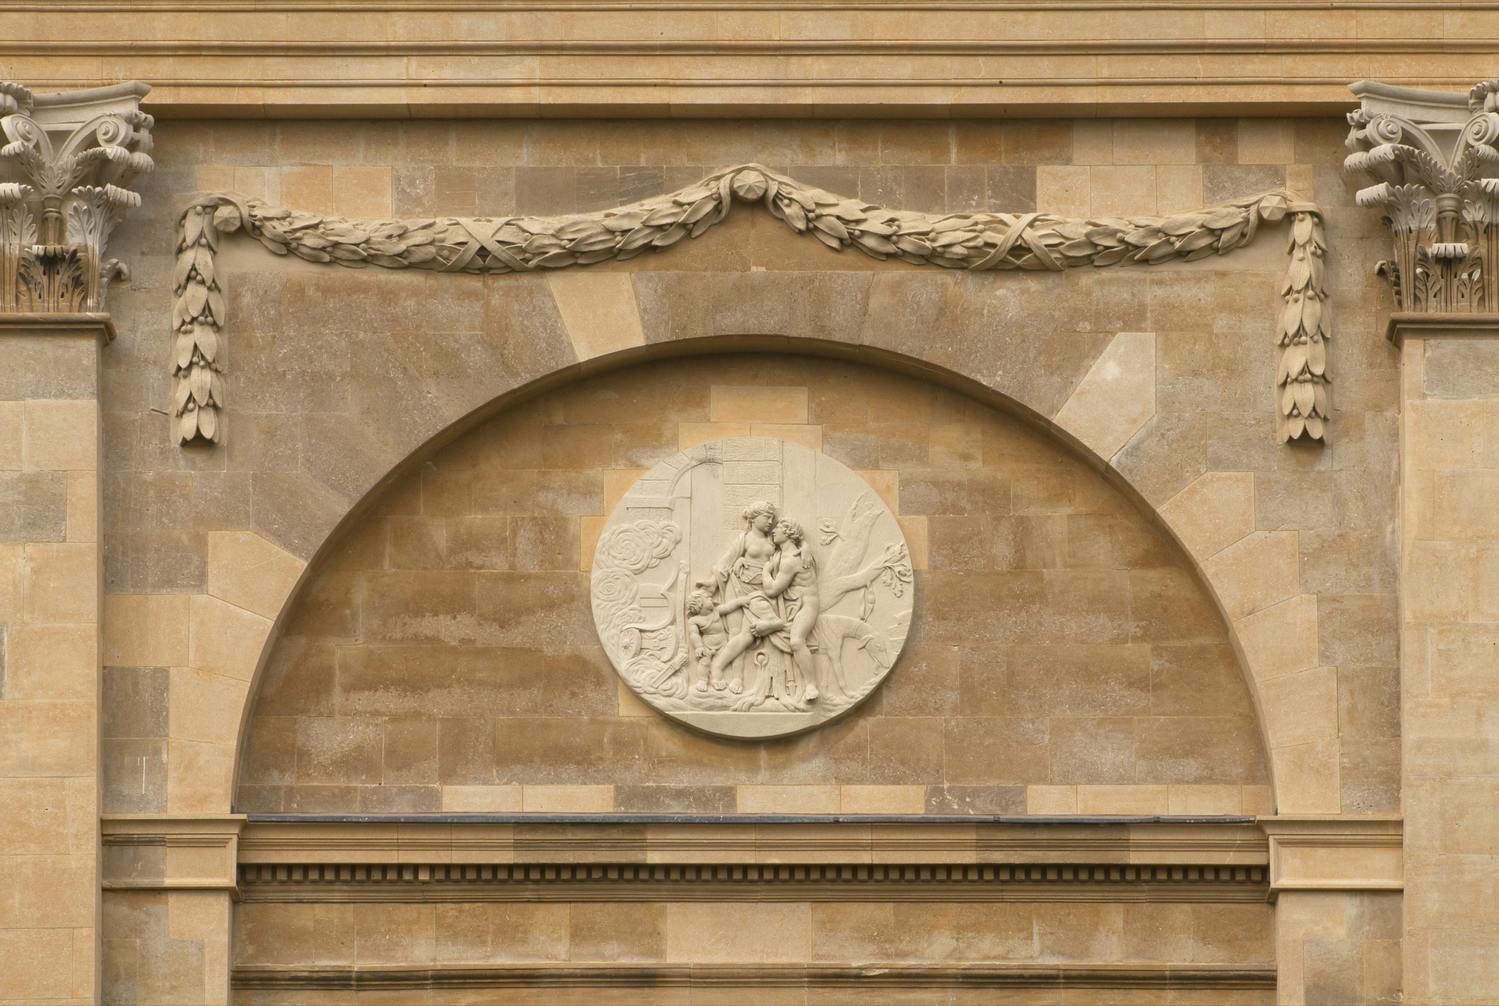 Stone conservation detail at Stowe House, Buckinghamshire